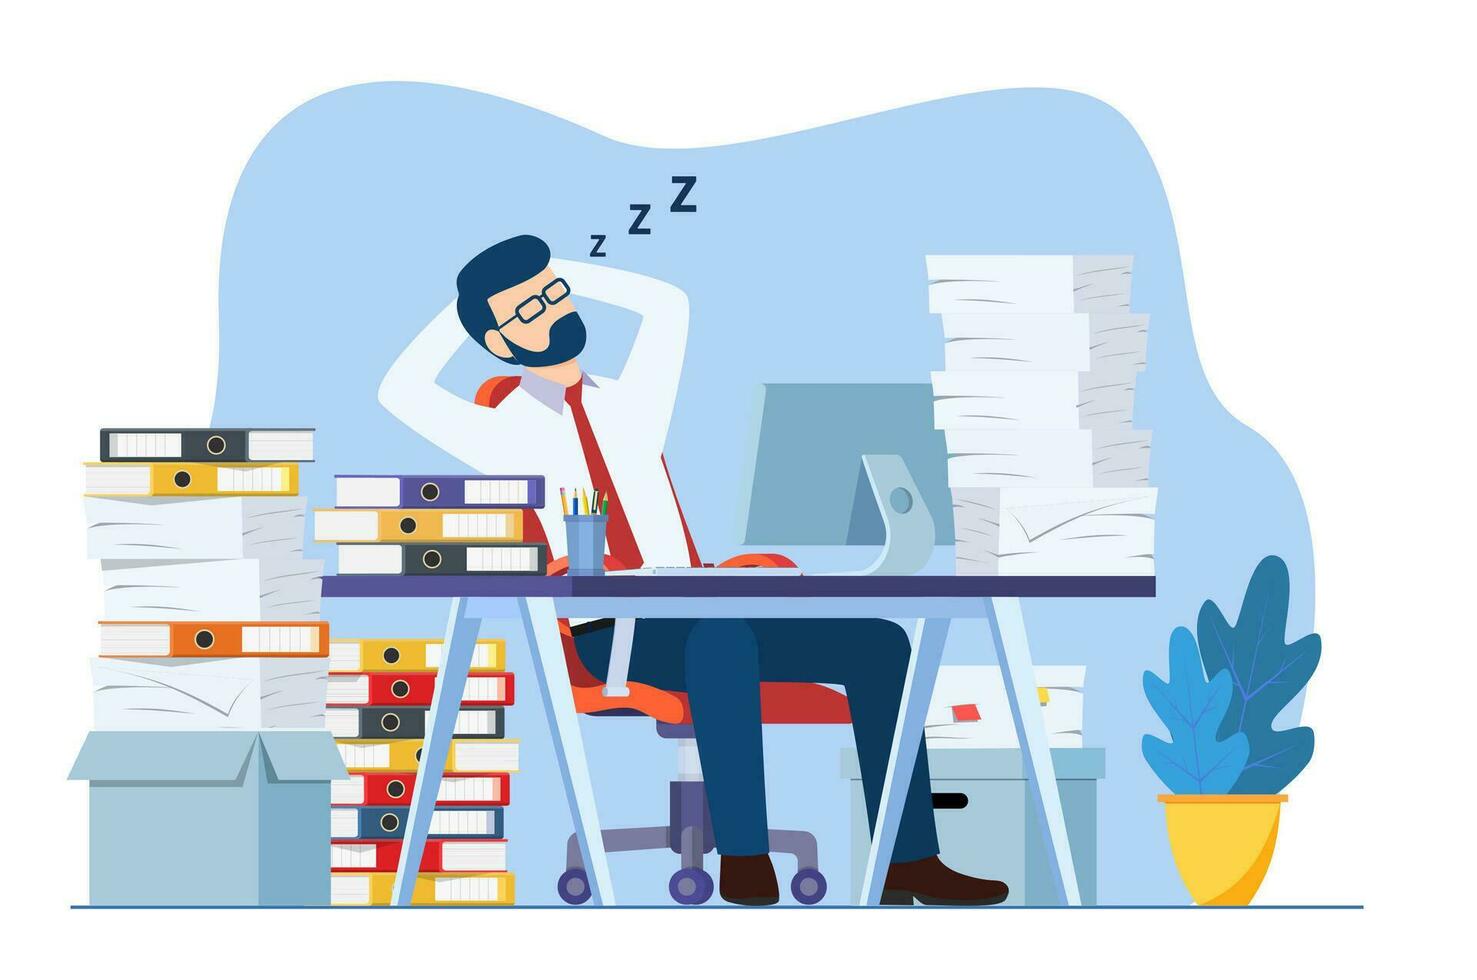 Business man is sleeping at his workplace desk during working hours with the piles of paper document around. Procrastinating and wasting time concept. Vector illustration in flat style